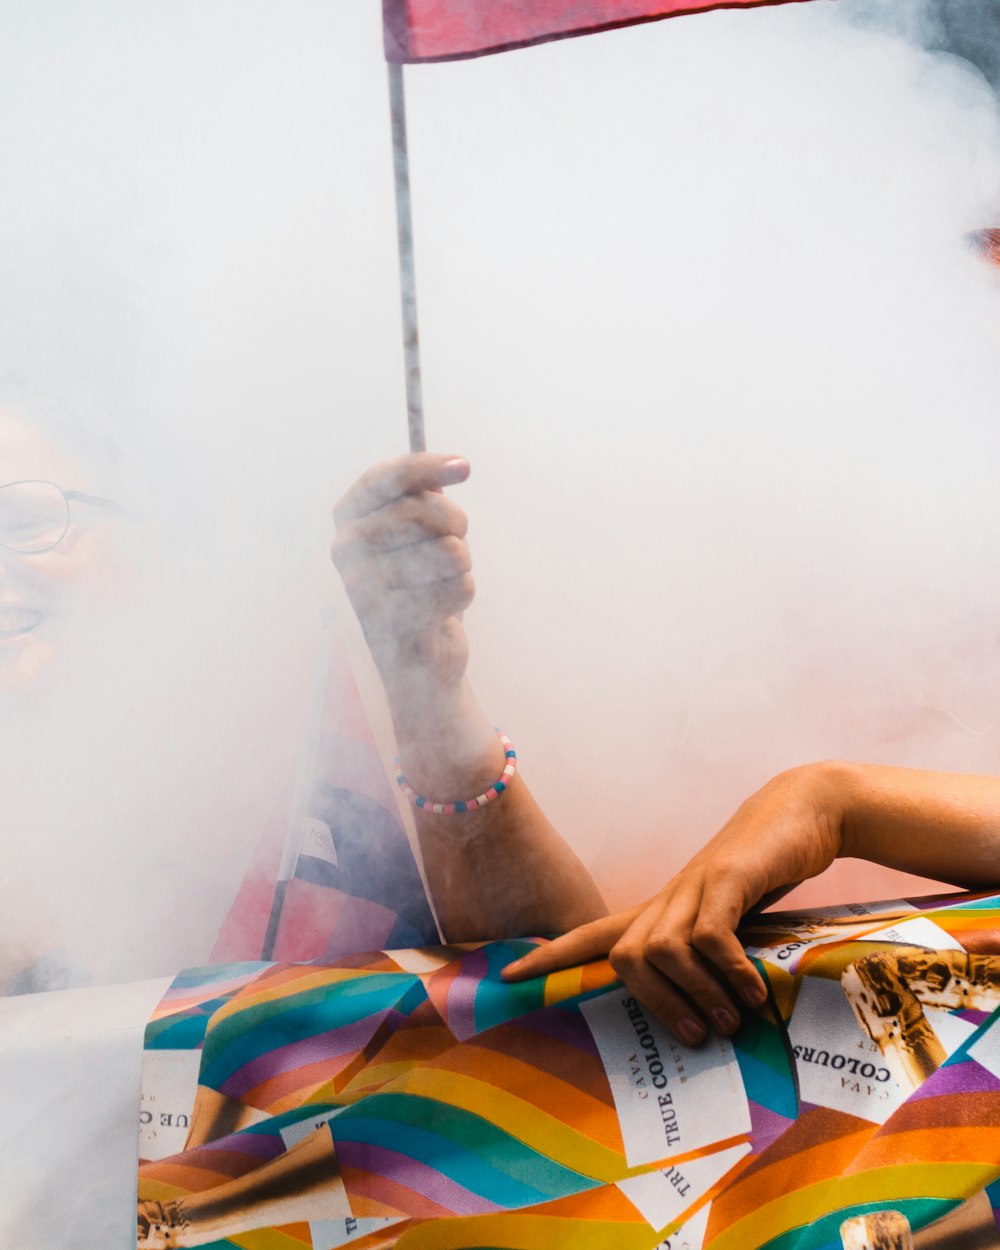 a person holding a flag and smoking a cigarette